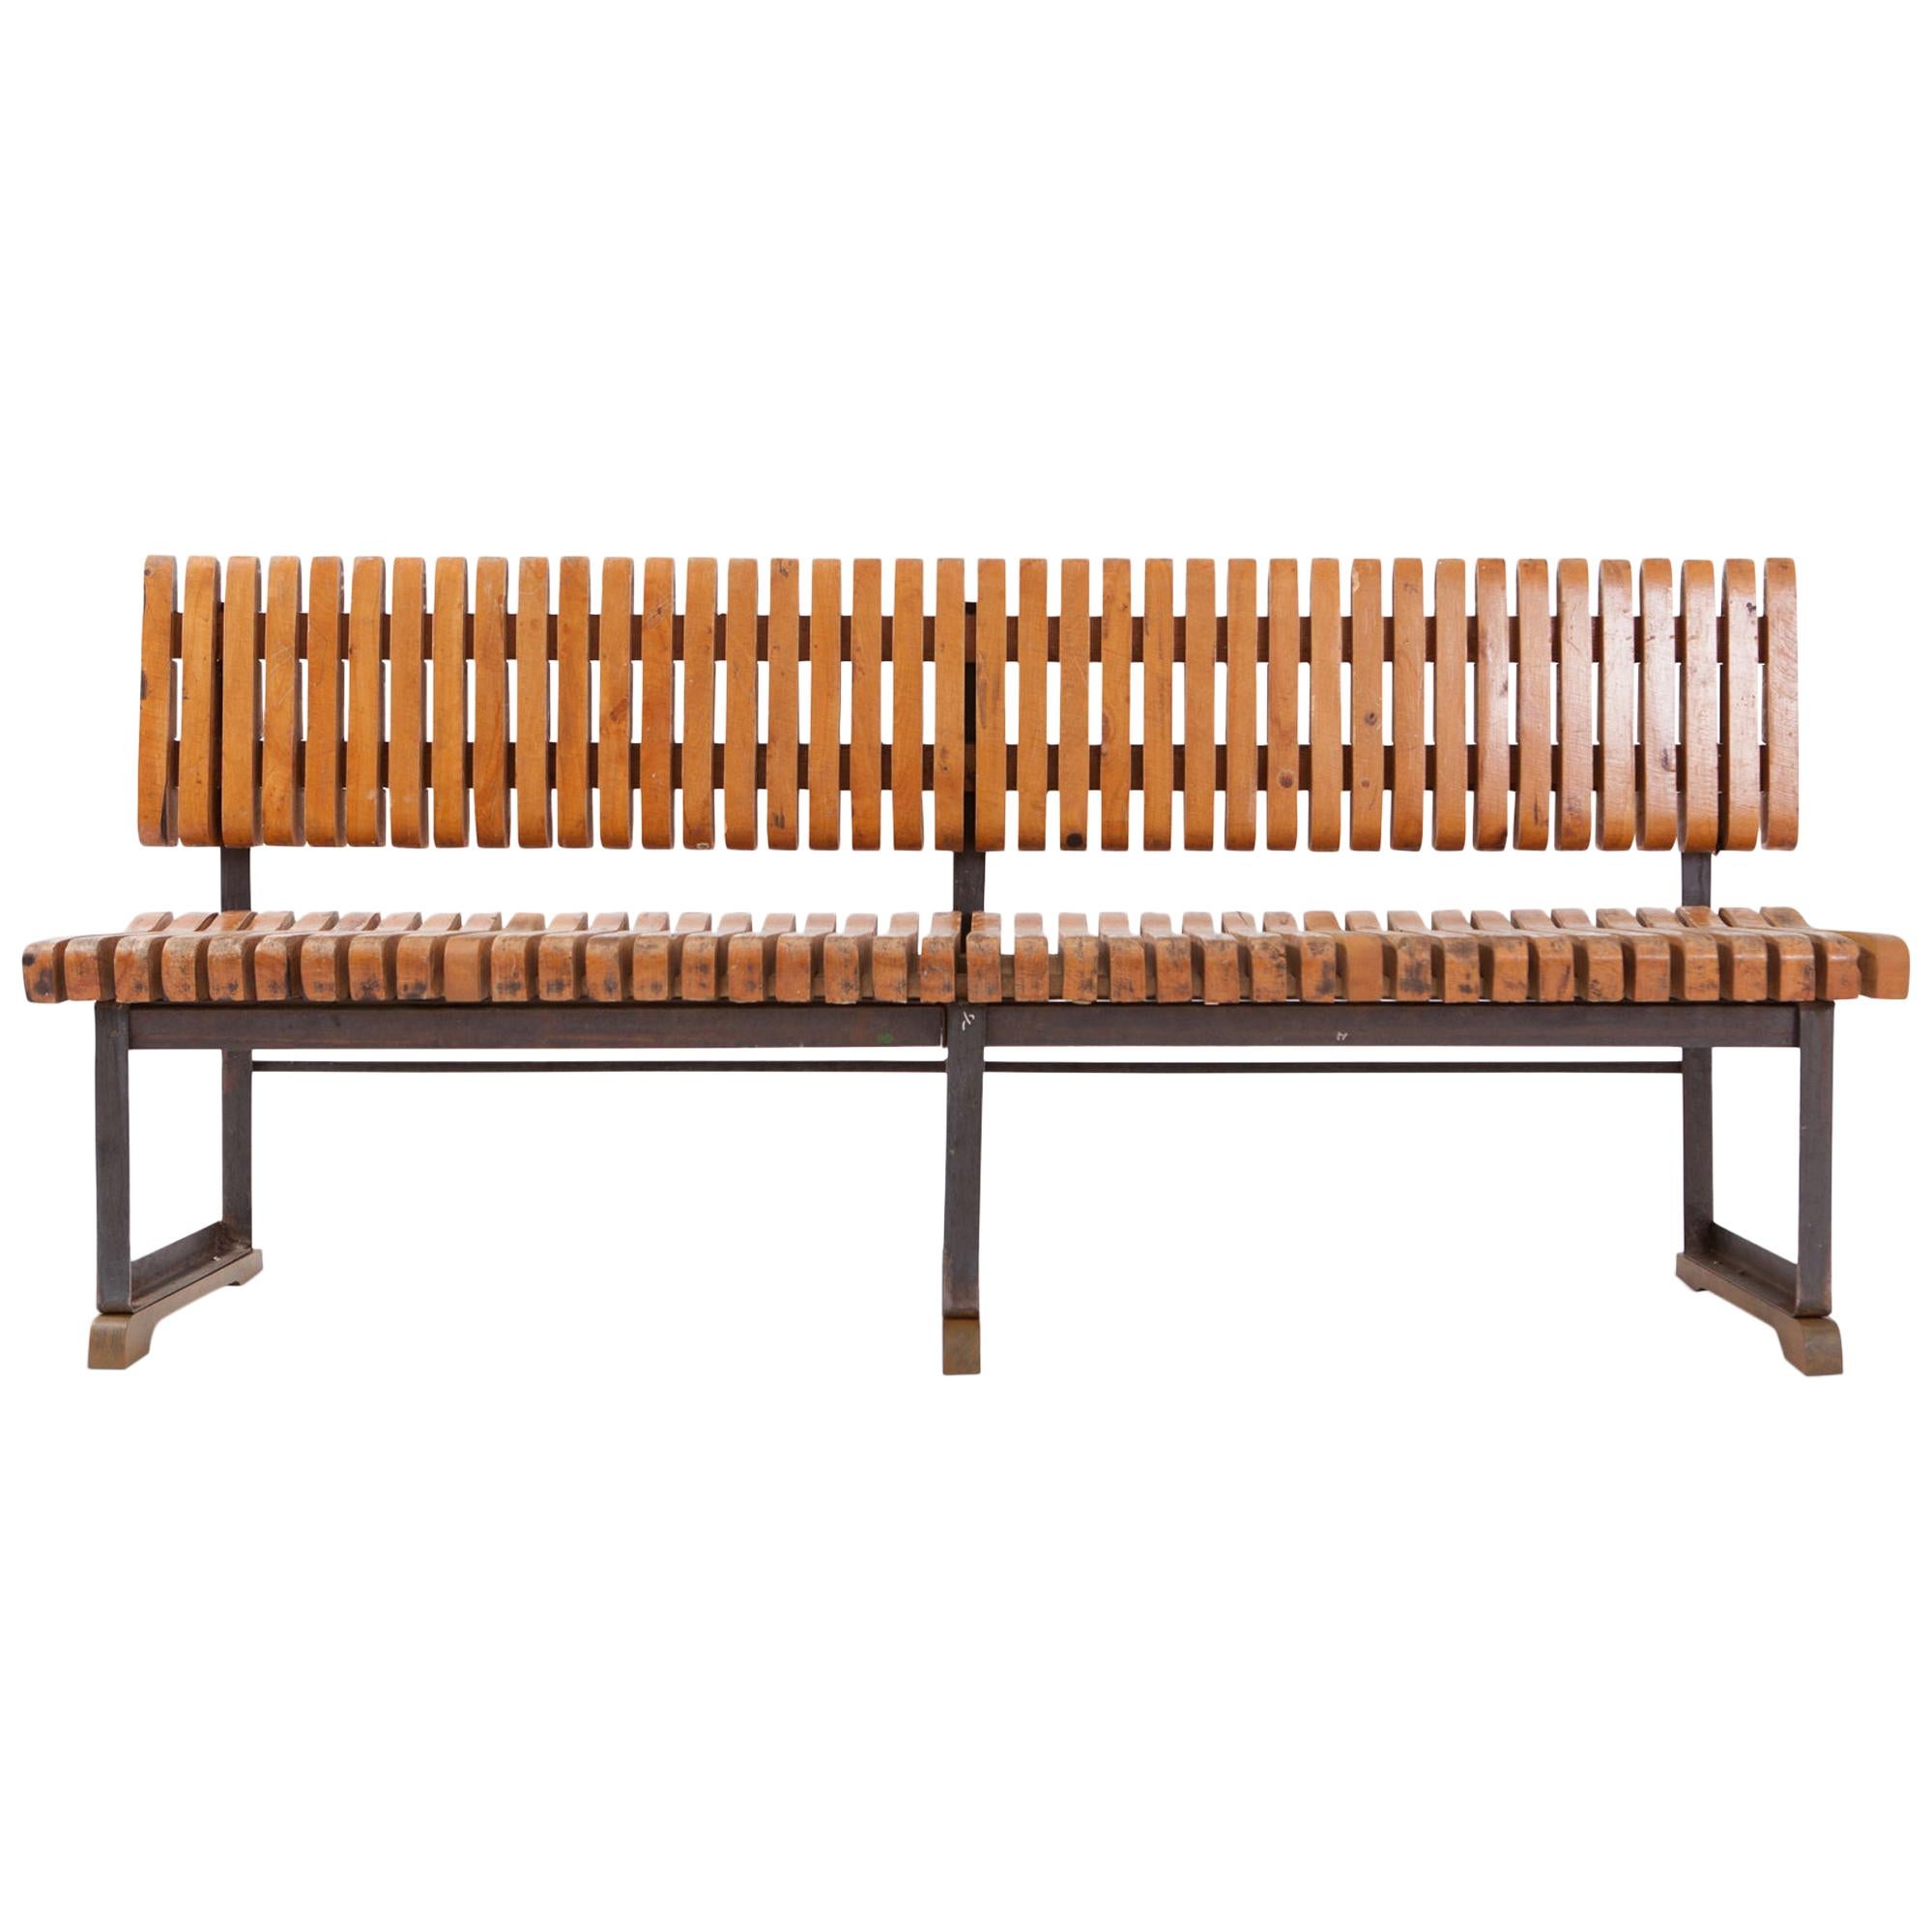 Industrial Bench with Slatted Seat and Backrest